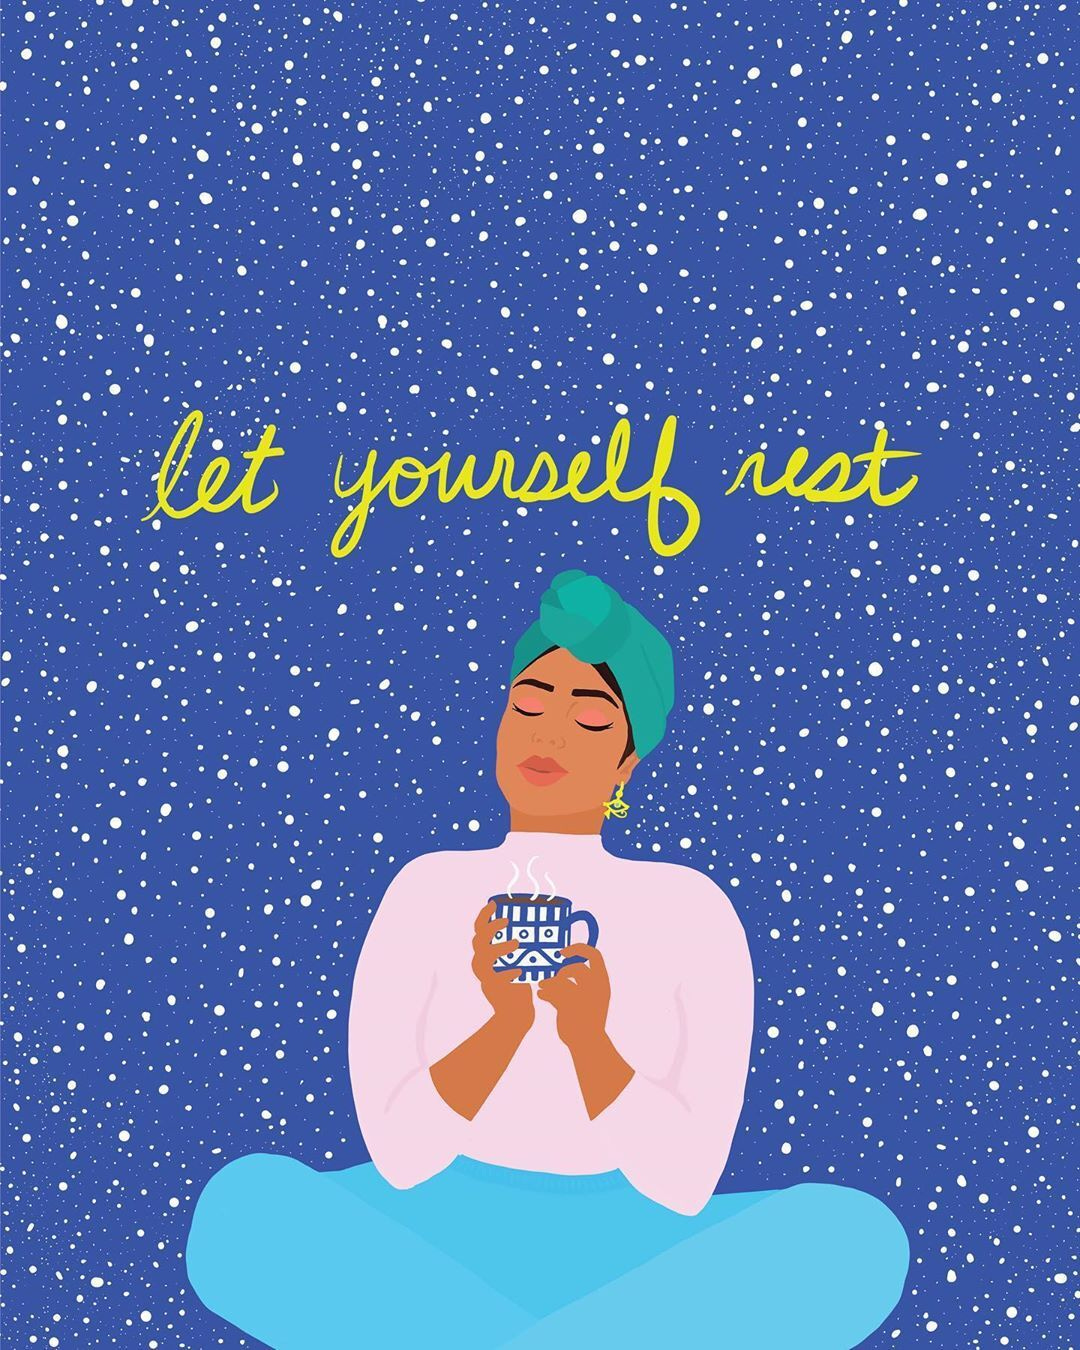 A woman in a head scarf sits against a backdrop of stars, holding a mug of tea, with the words appearing in cursive above her head "let yourself rest"